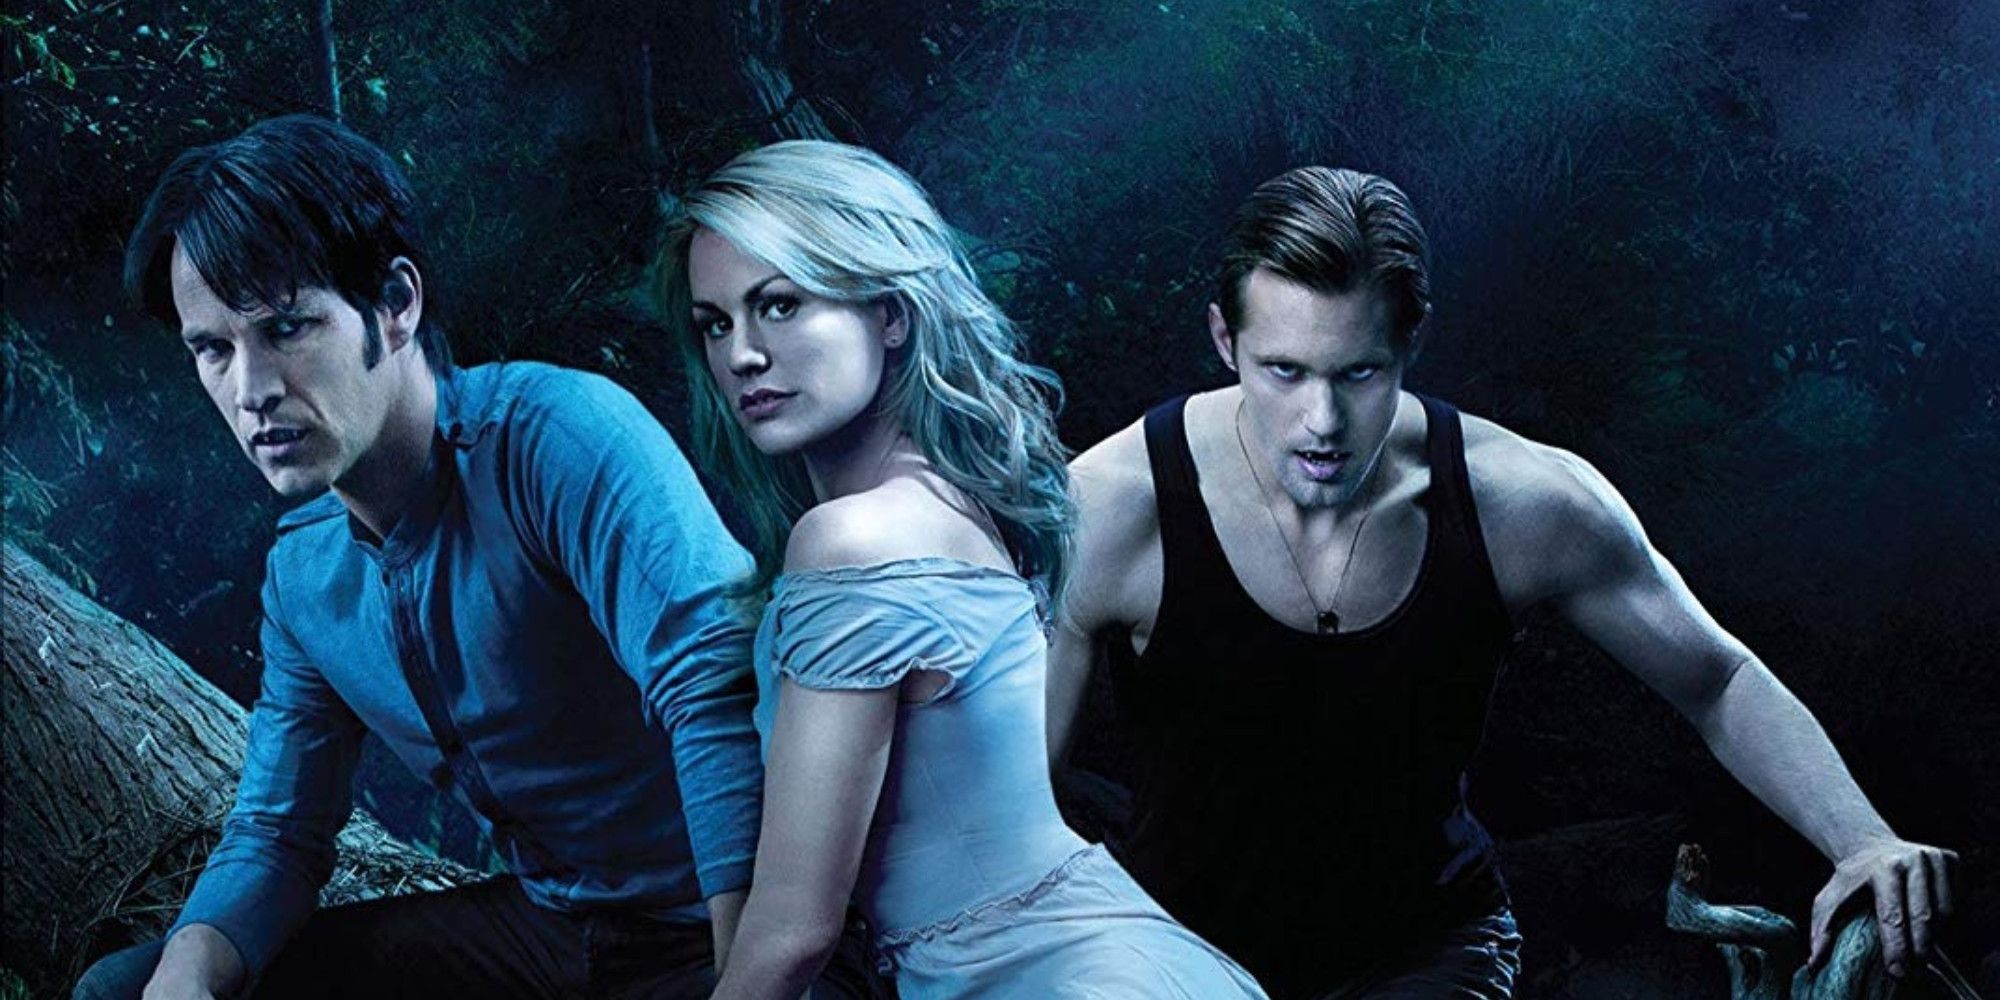 Stephen Moyer, Anna Paquin, and Alexander Skarsgard from True Blood form a love triangle.